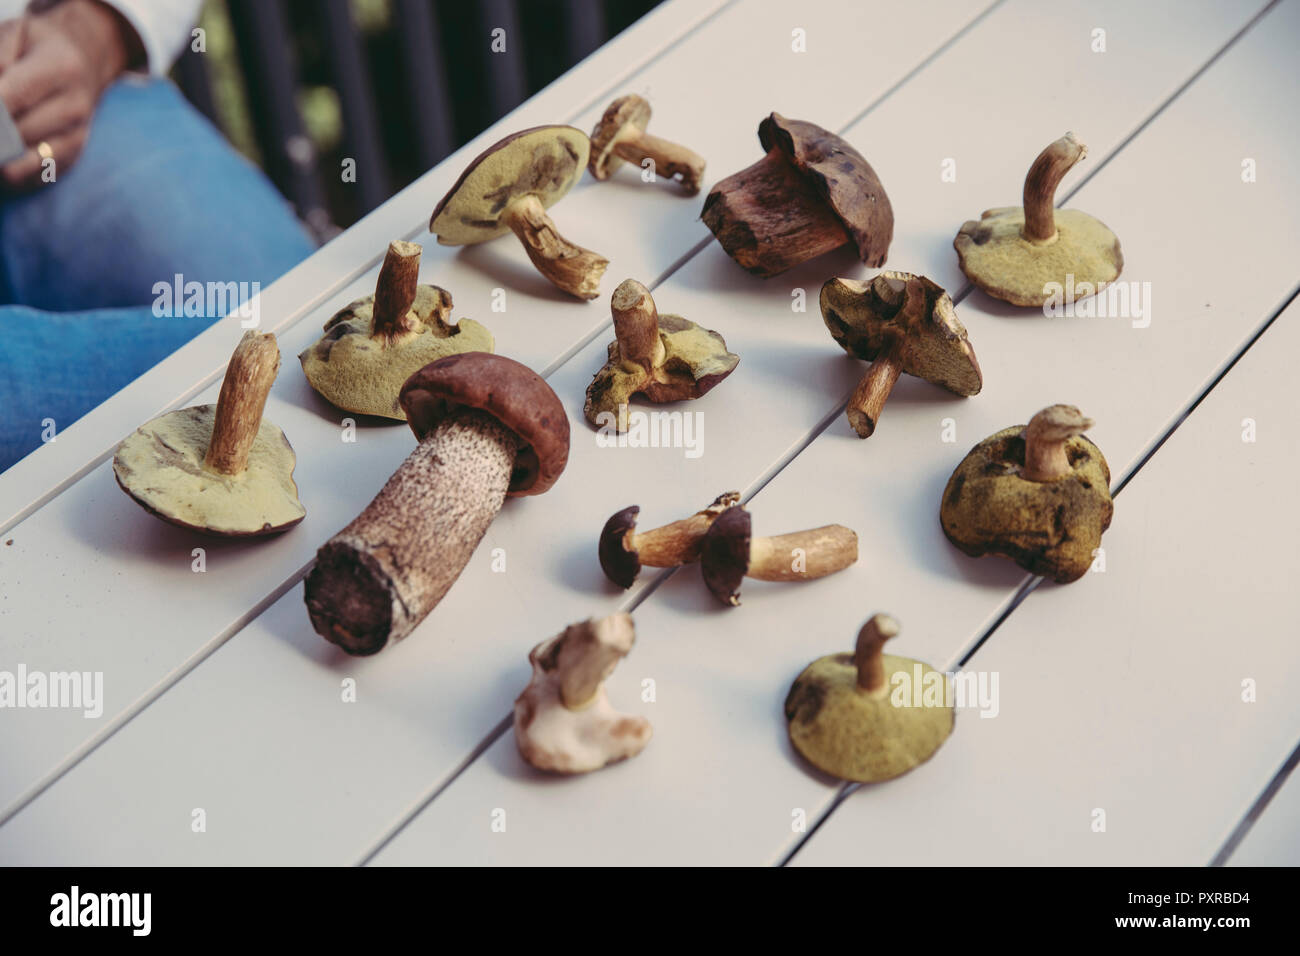 Collection of edible wild mushrooms on table Stock Photo